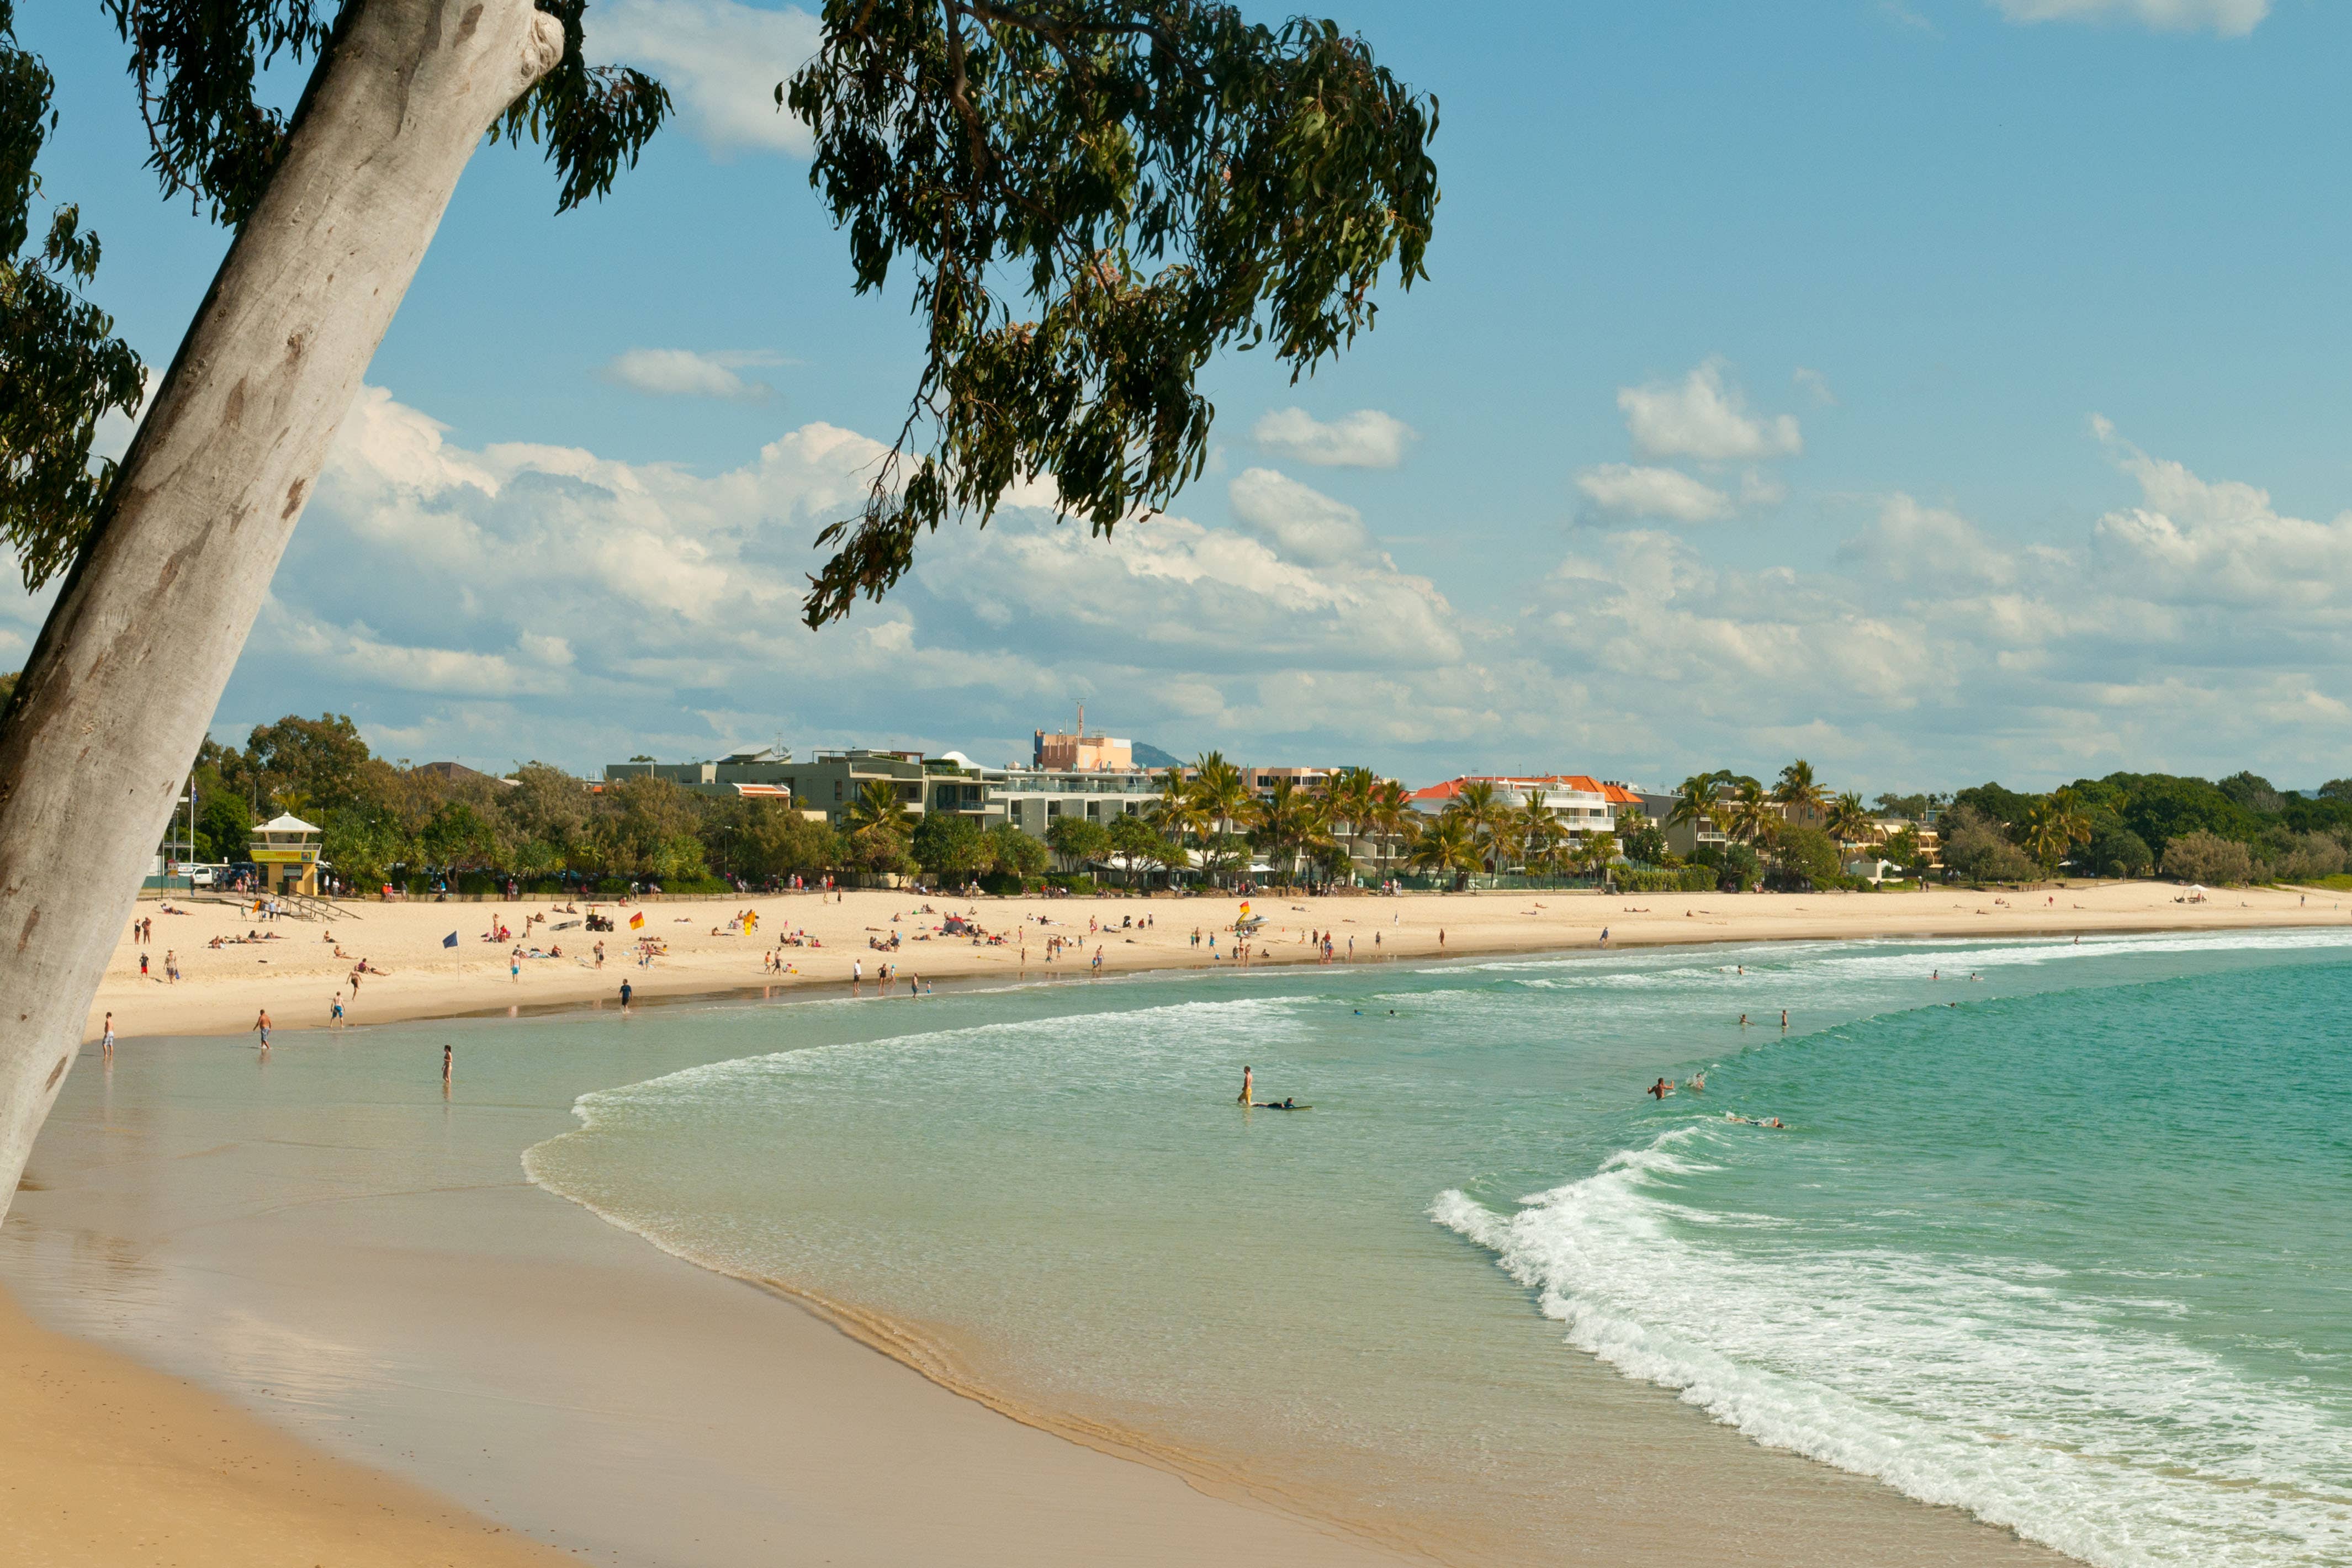 A British backpacker has been stabbed by a teenage boy in the resort of Noosa on the Queensland coast in Australia, according to local media reports (Robert Wyatt/Alamy/PA)